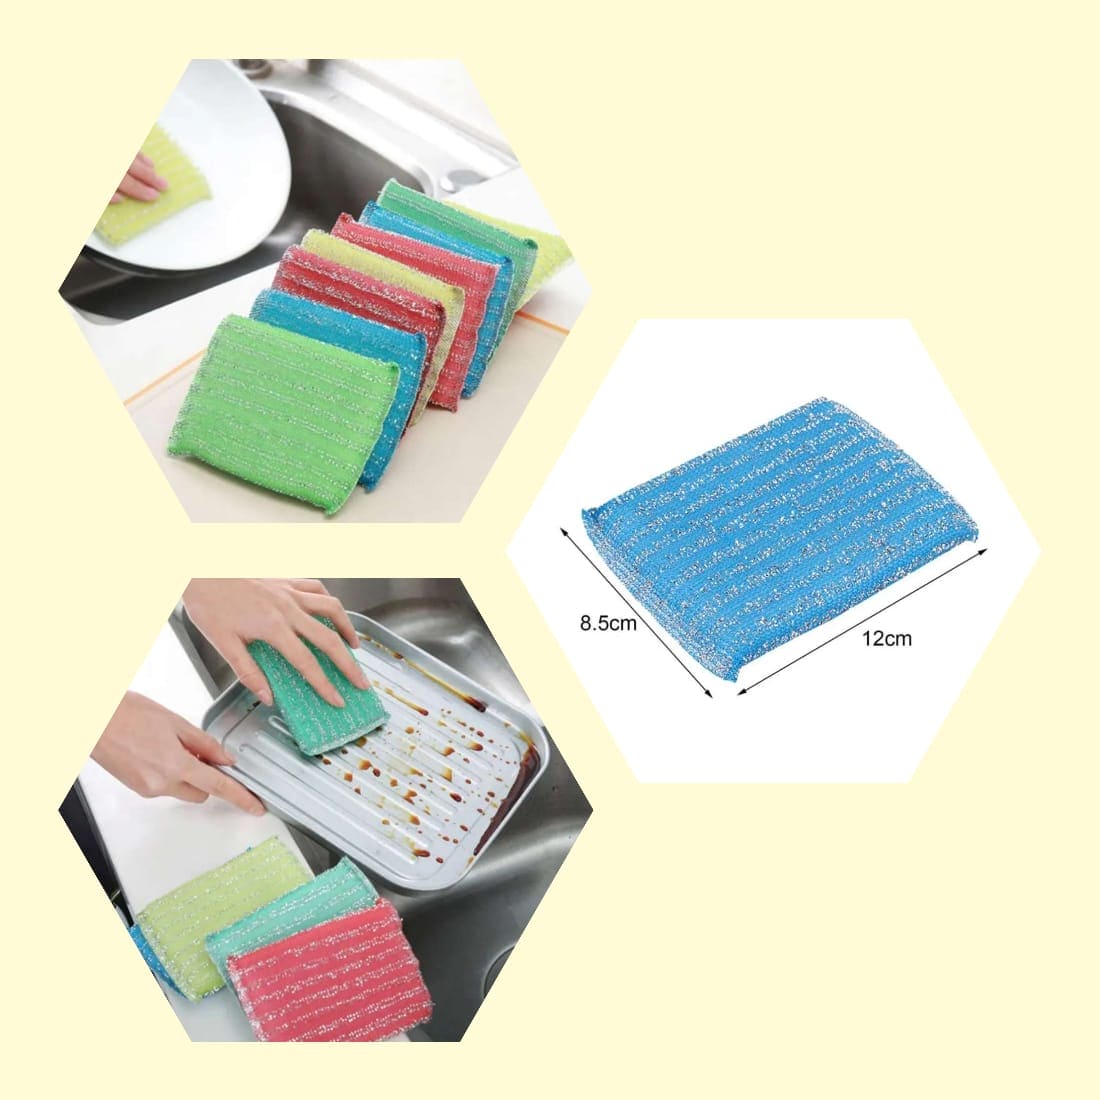 Set Of 4 Kitchen Dishwashing Sponge Fabric, Washcloths Scouring Pads, Wire Strip Diswashing Clothes, Multi-use Cooking Utensils Cleaner, Multifunctional Flexible Dish Cloth, Anti-deform Comfortable Cleaning Sponge